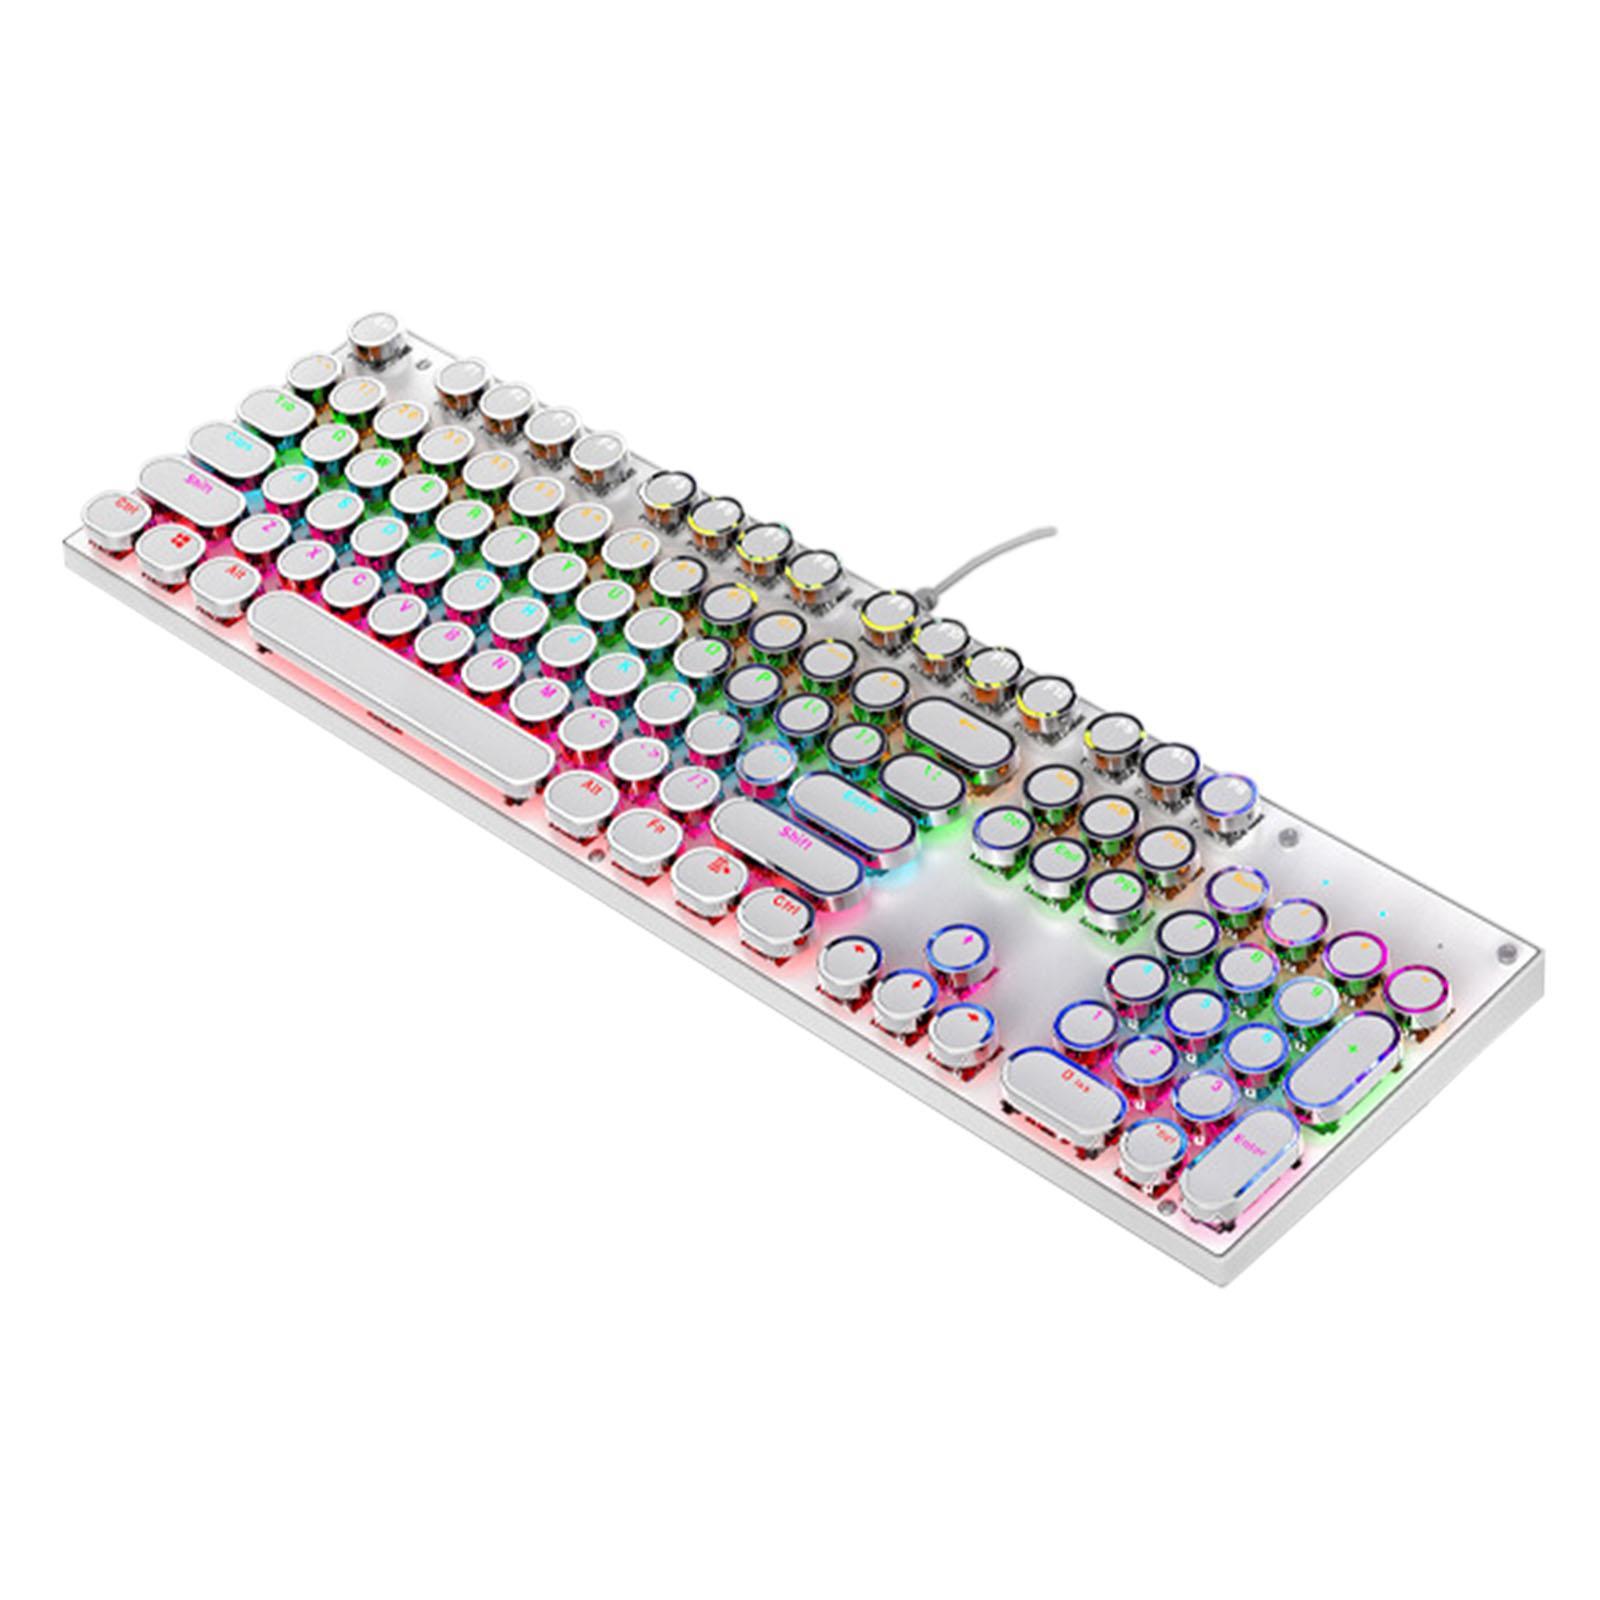 Retro Punk 104 Keys Gaming Keyboard Blue Switch Mechanical Shaft Gaming Keypad for Office Home Game PC